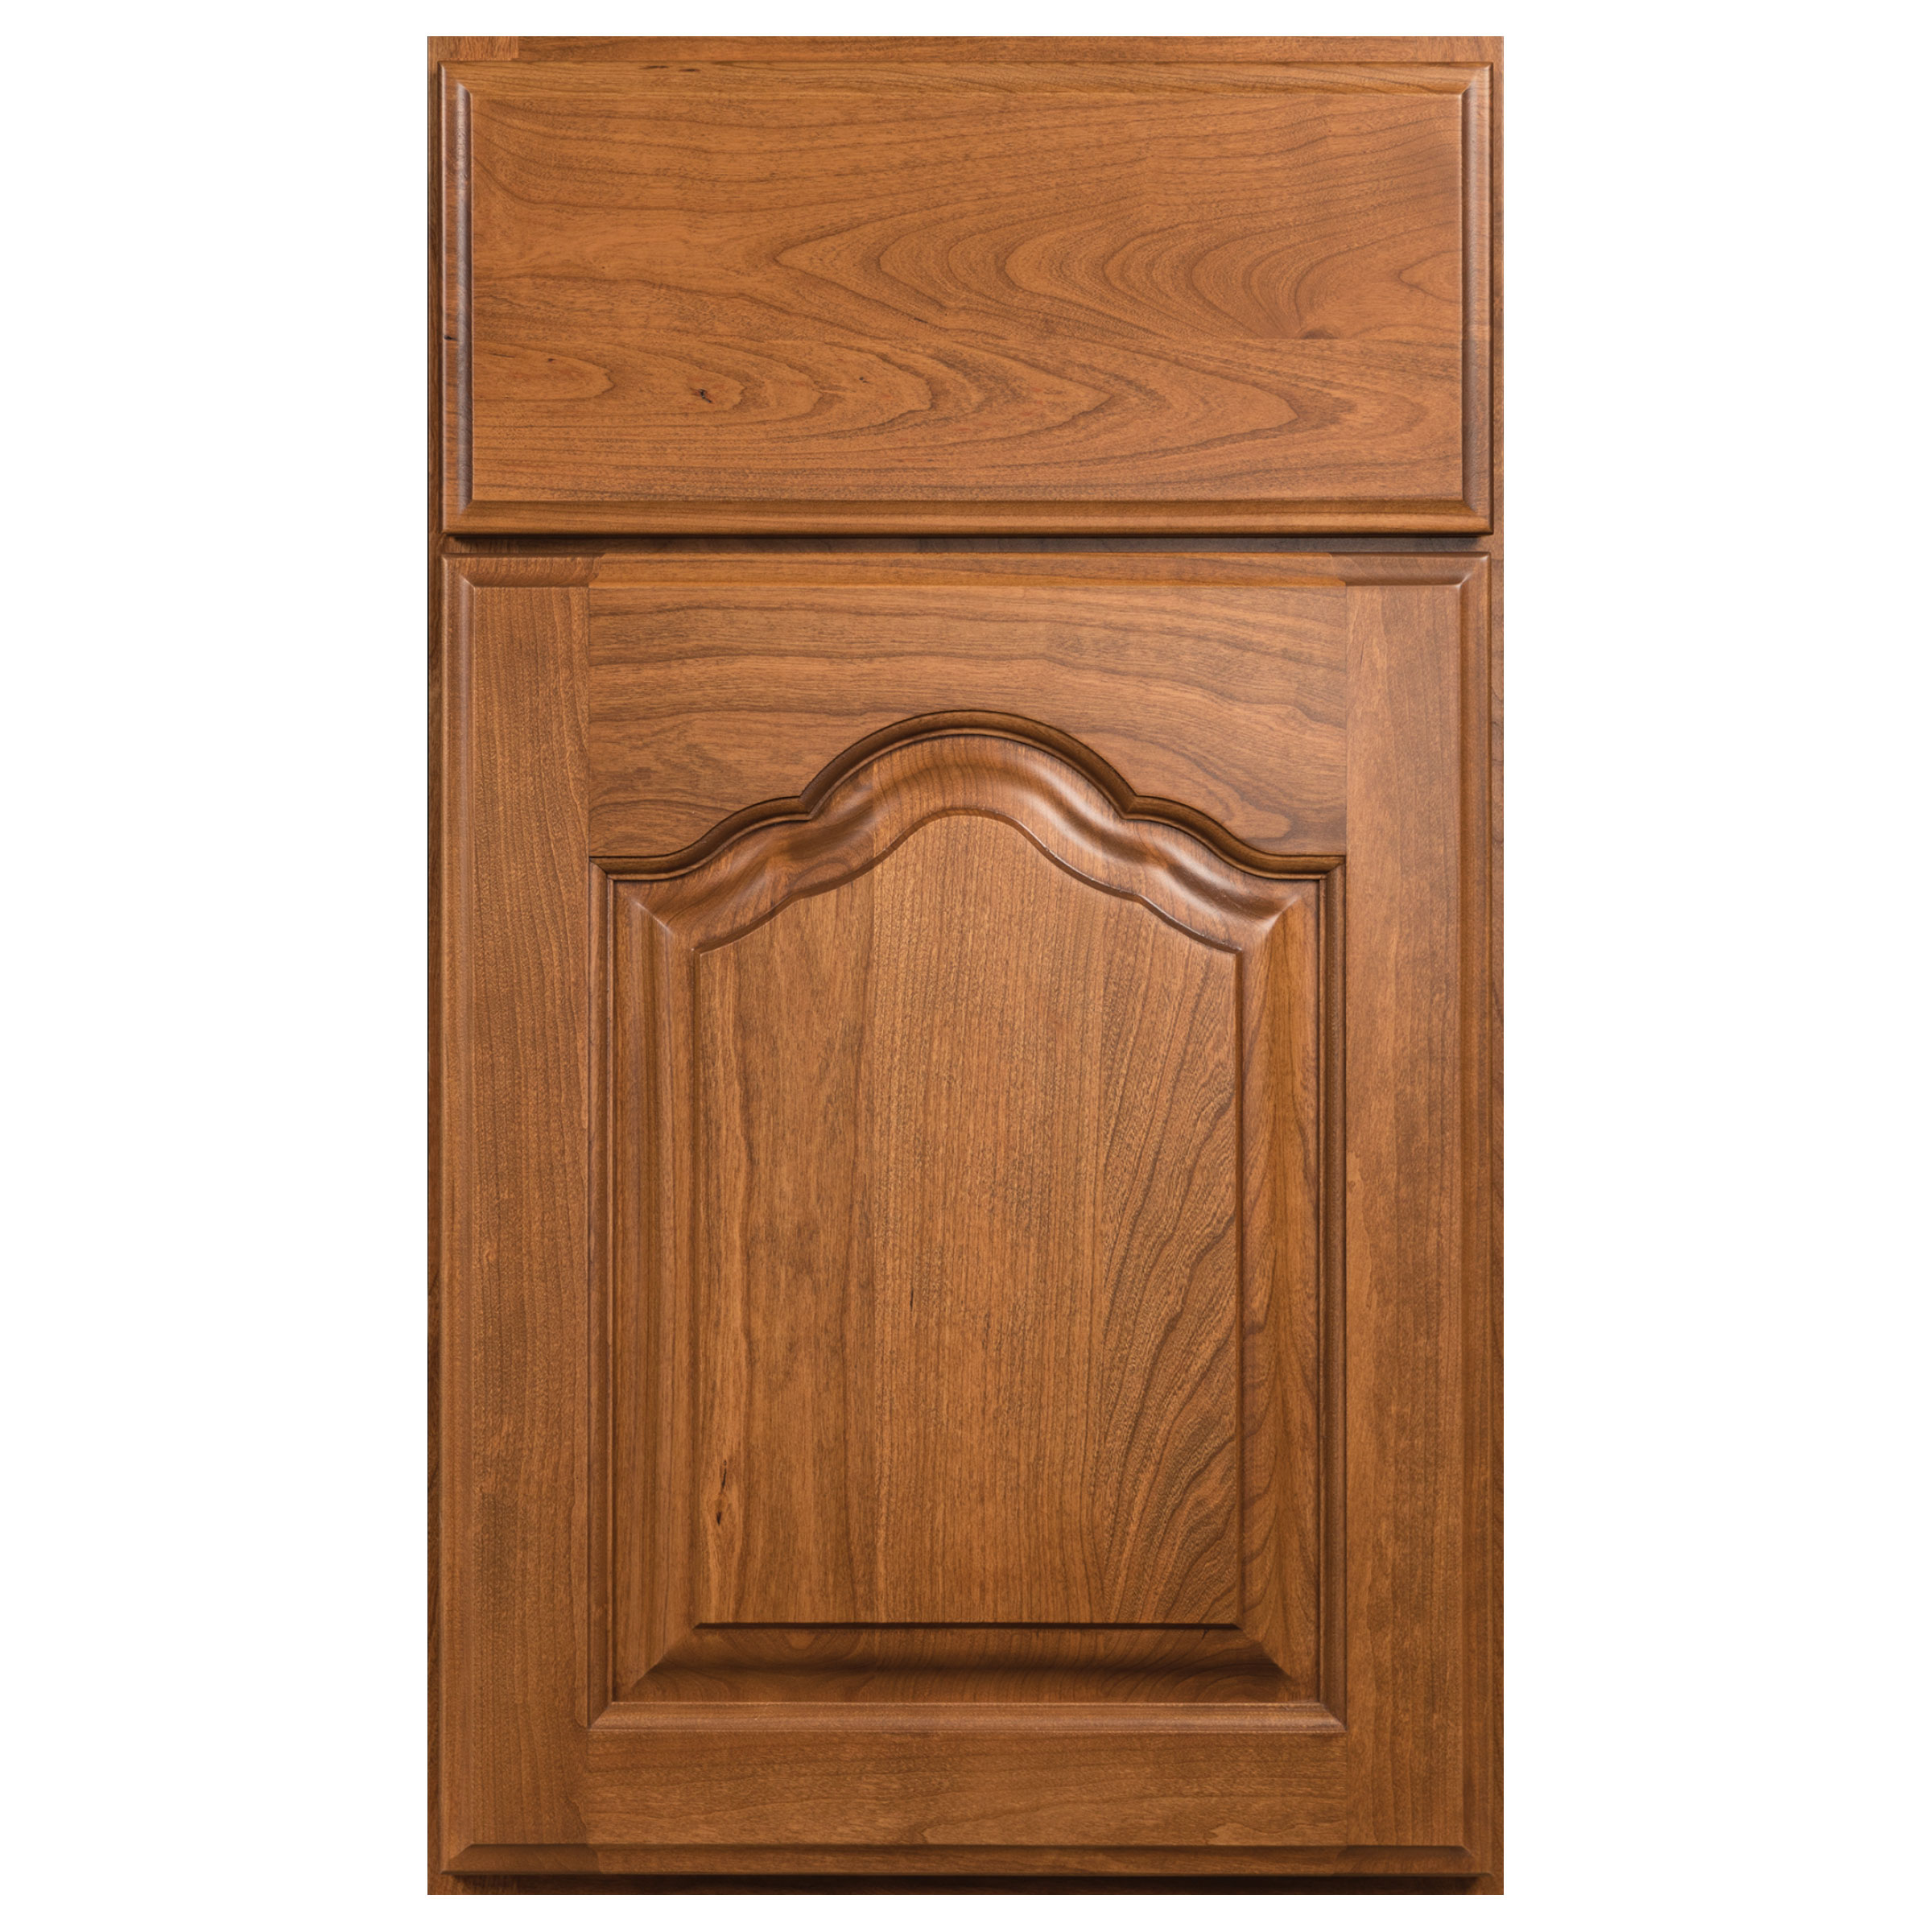 Country French Arched Crystal Cabinets